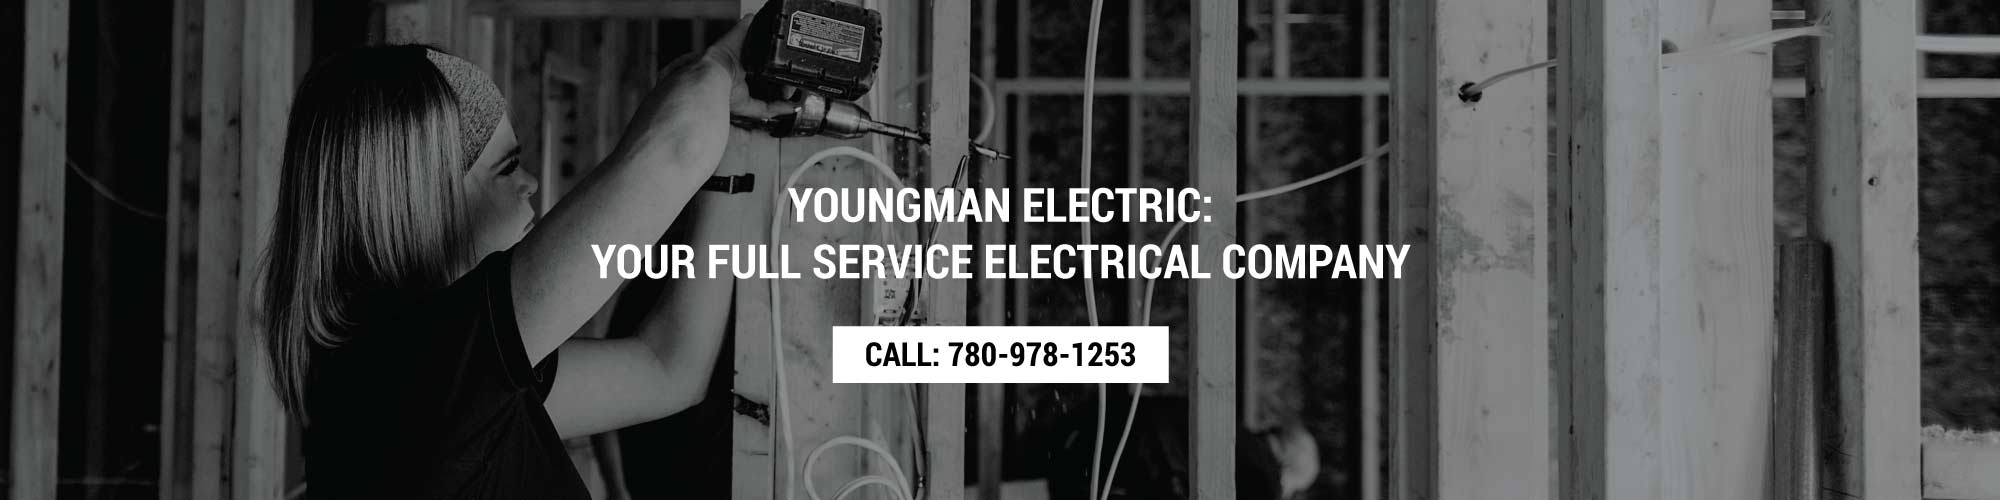 Youngman Electric - Grande Prairie's Residential & Commercial Electrical Specialists